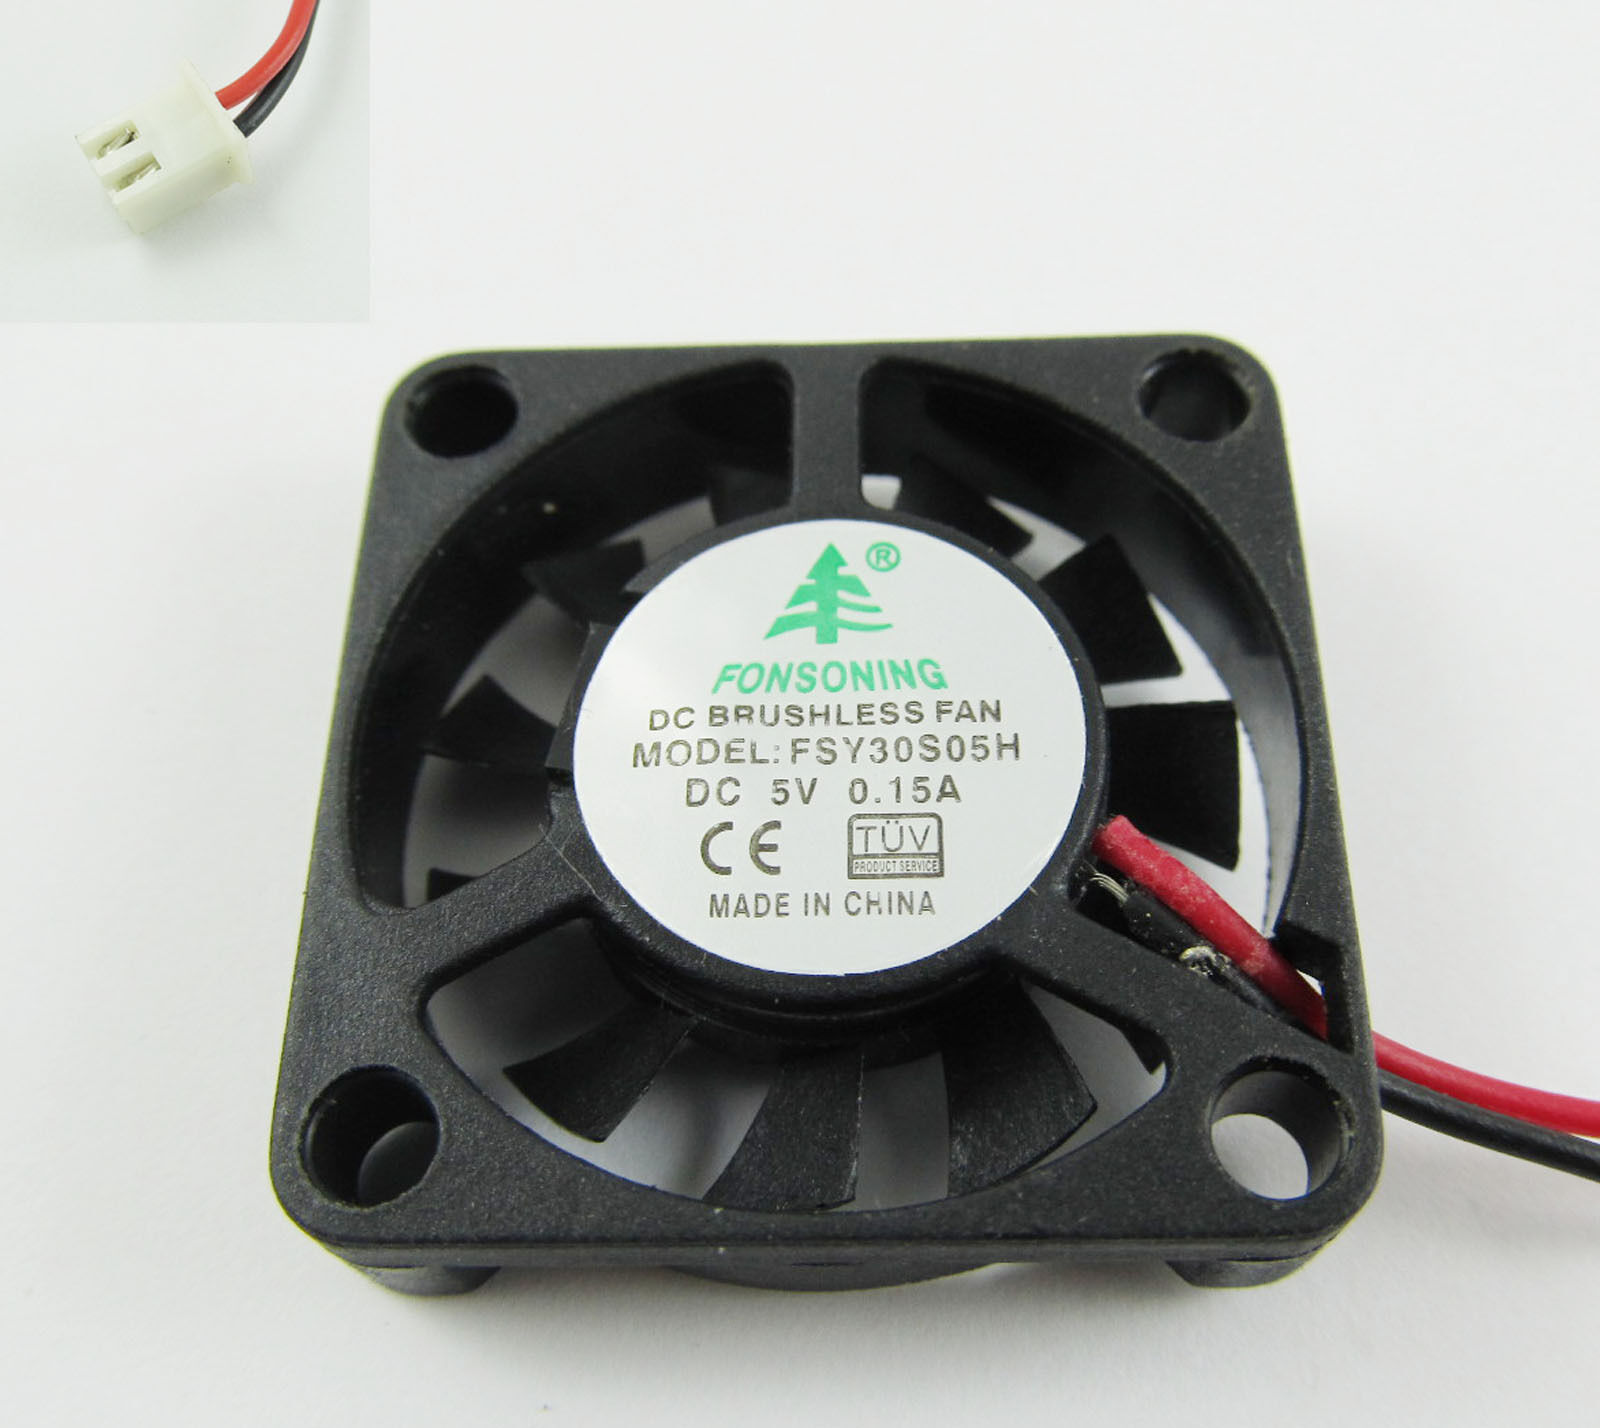 10x Brushless DC Cooling Fan 11 Blade DC 5V 30mmx30mmx06mm 3006 2 Pin Wire 0.15A